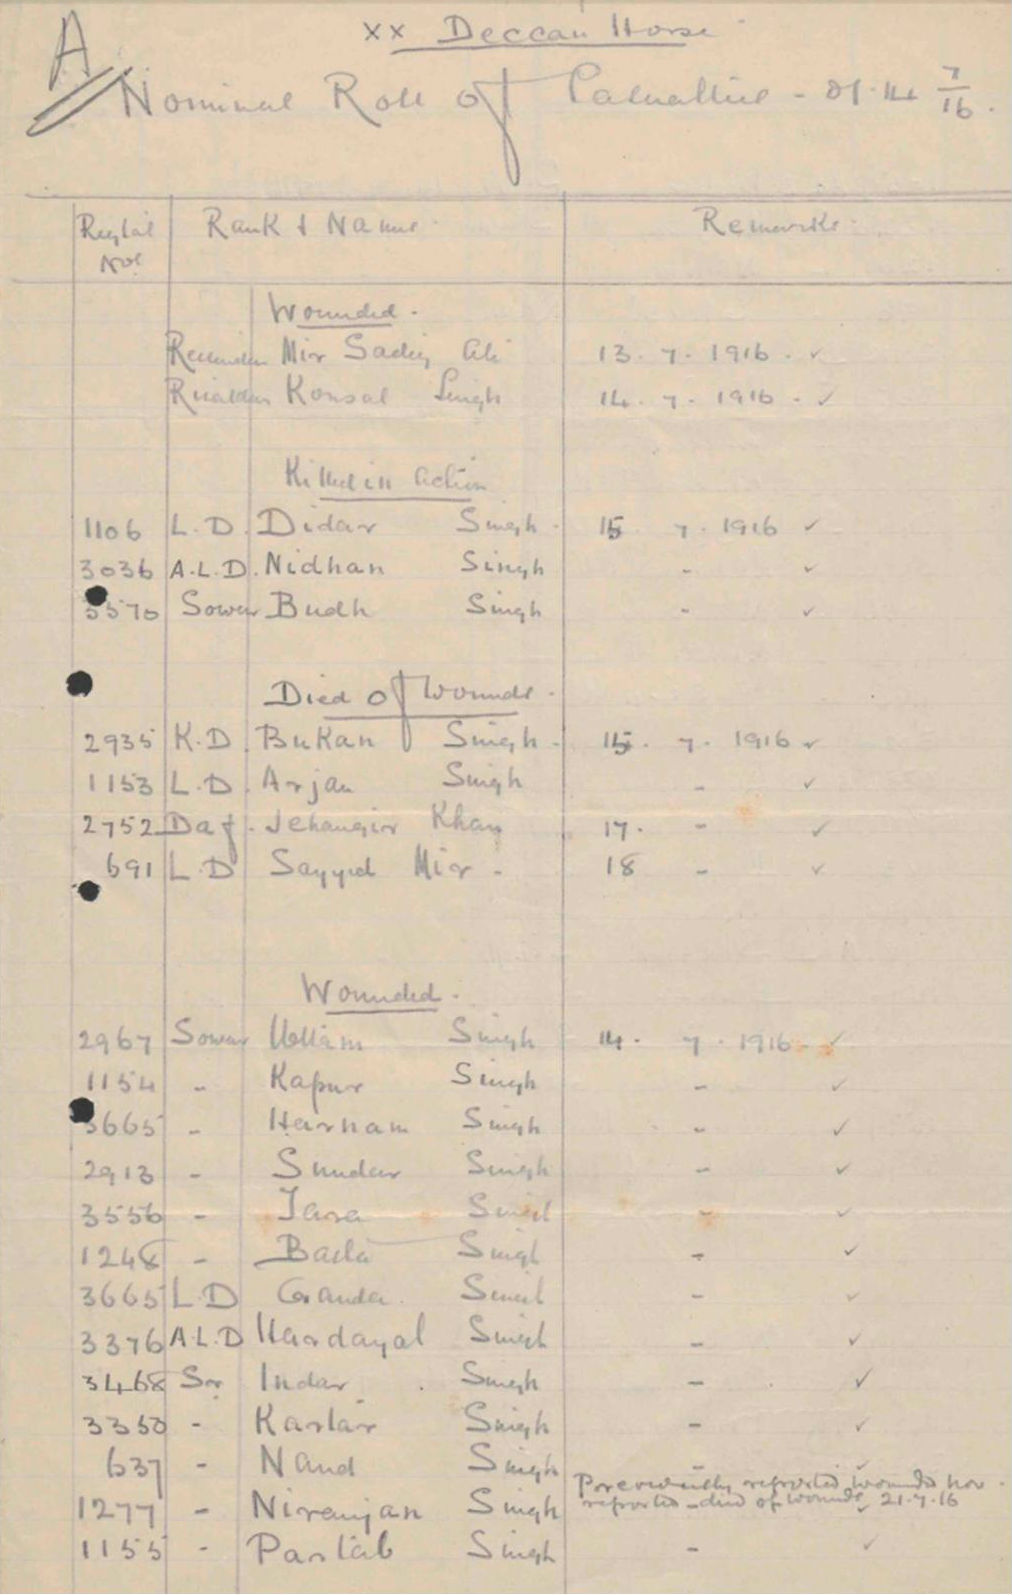 The first page of the 20th Deccan Horse casualty roll, 01-14 July 1916 WO 95-1187-3